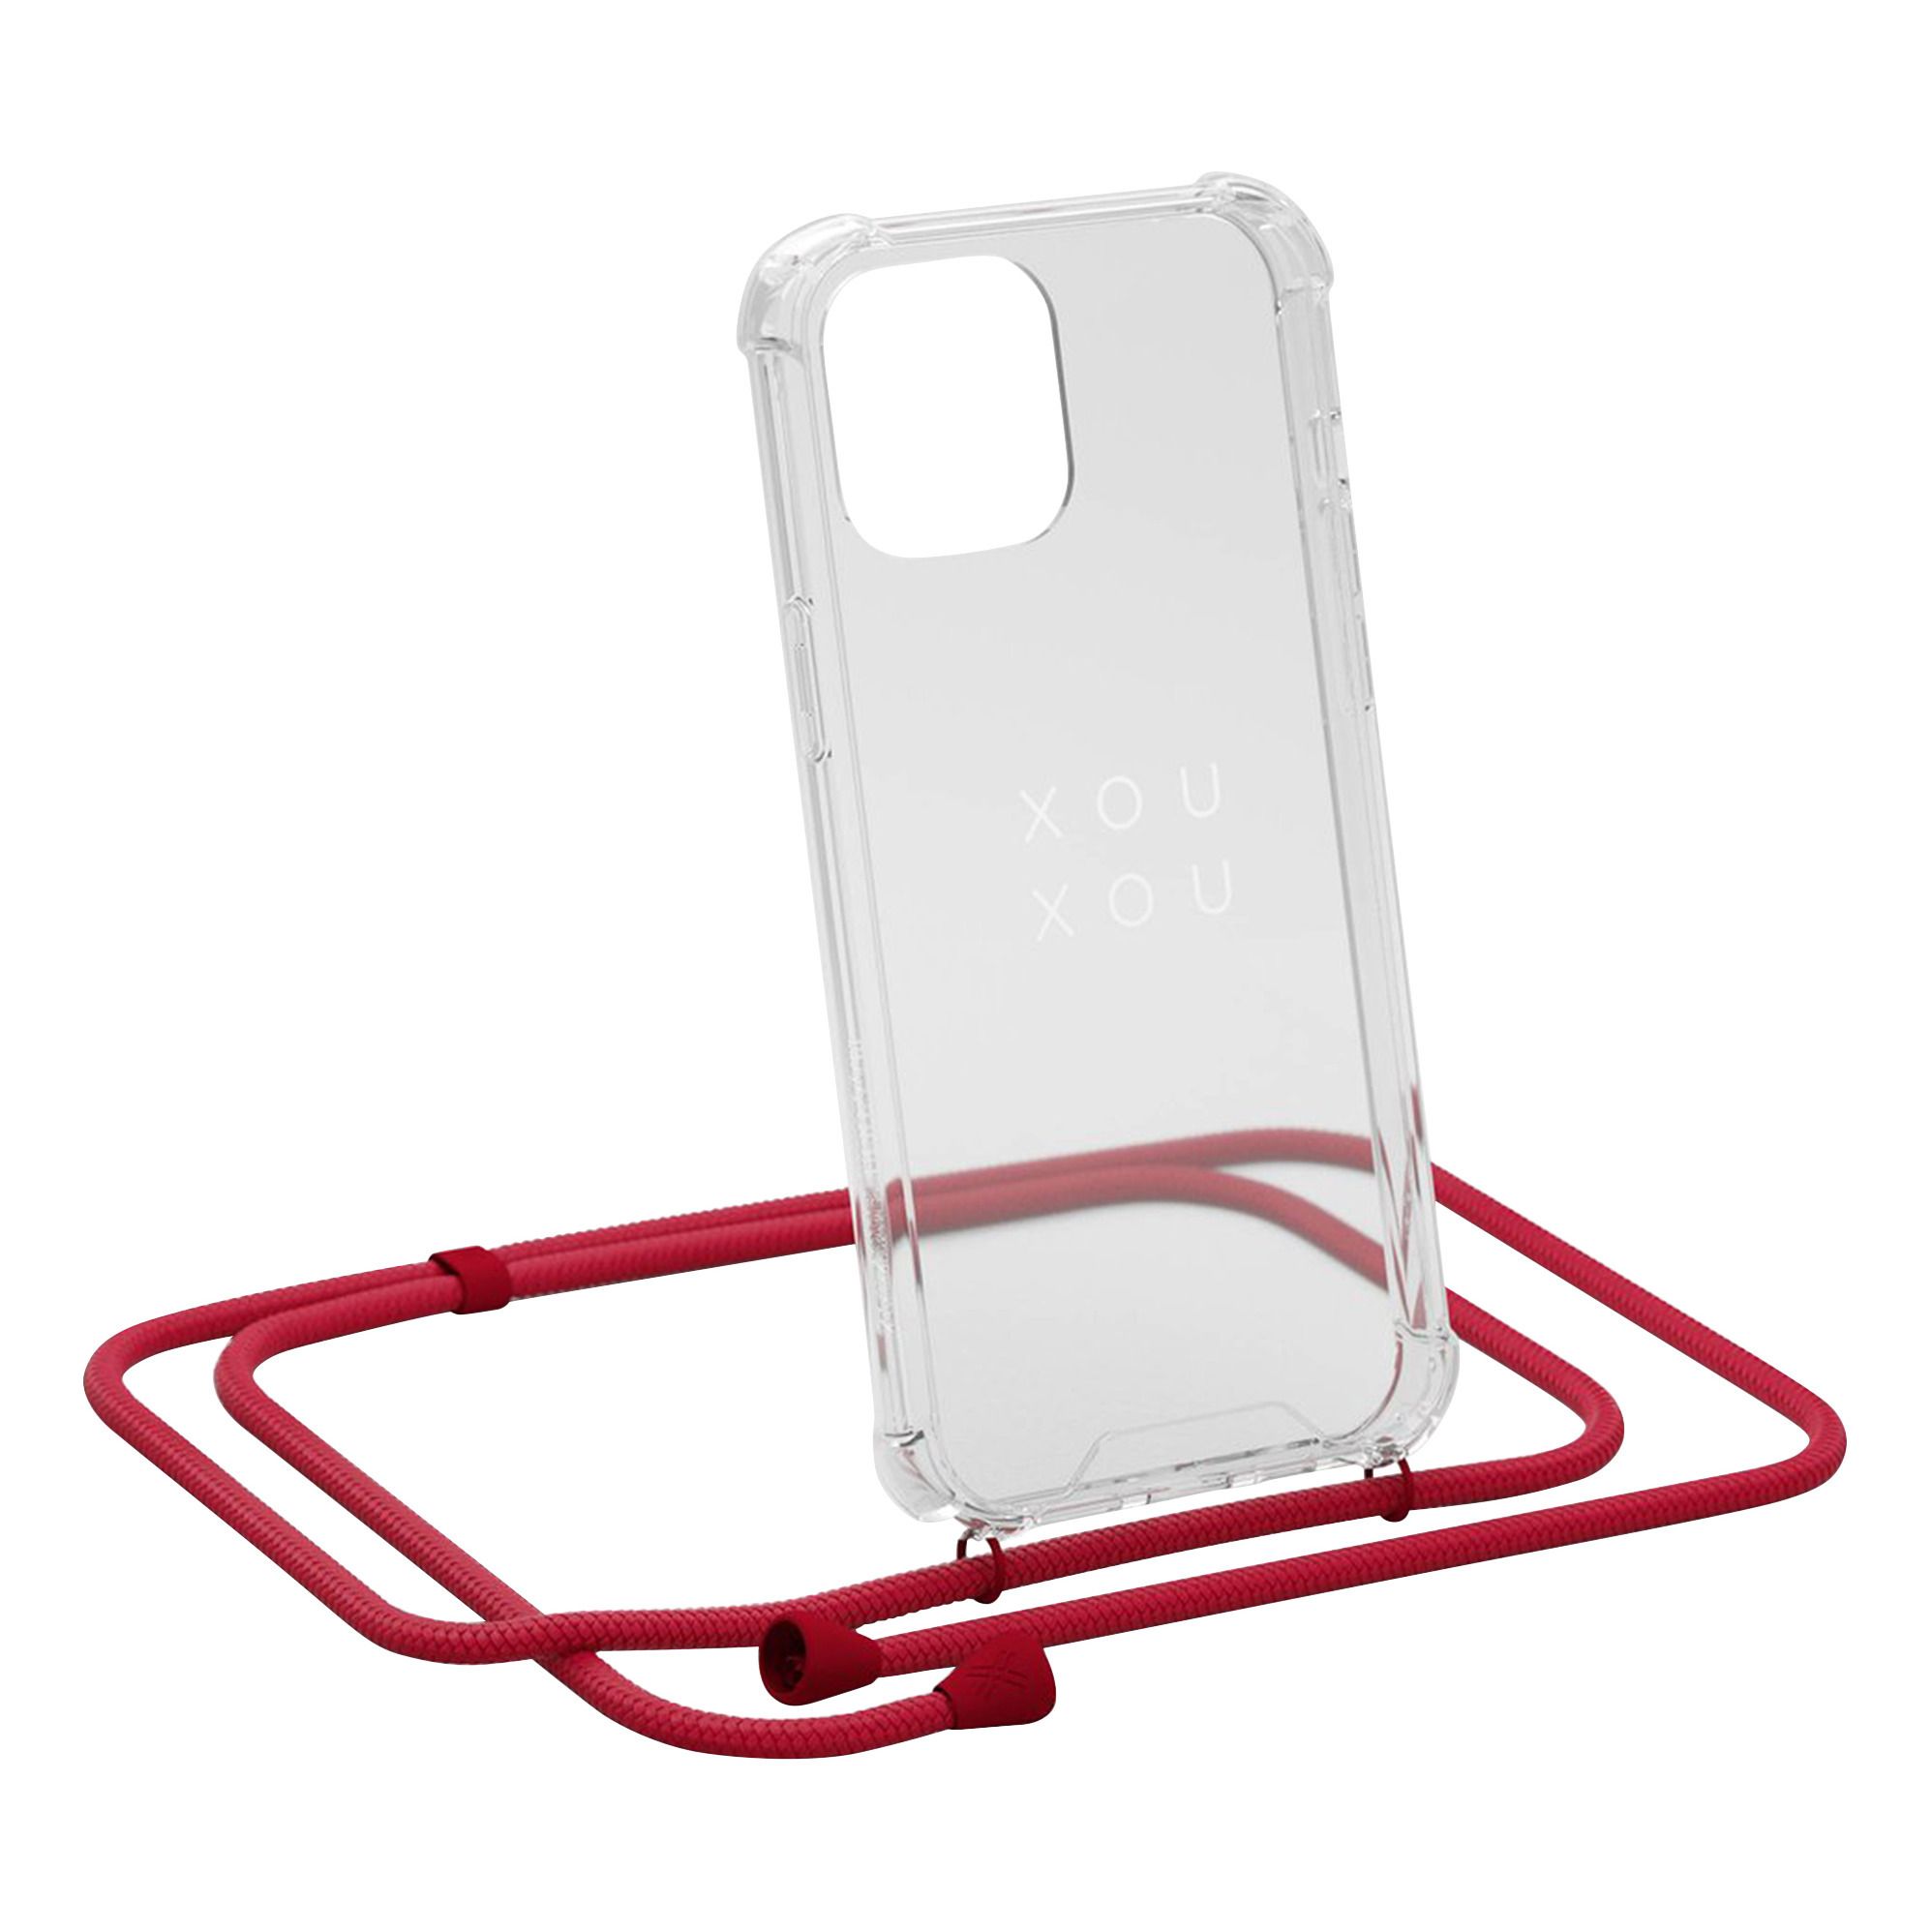 Xouxou - Collier pour Smartphone Riot Red - Rouge cerise